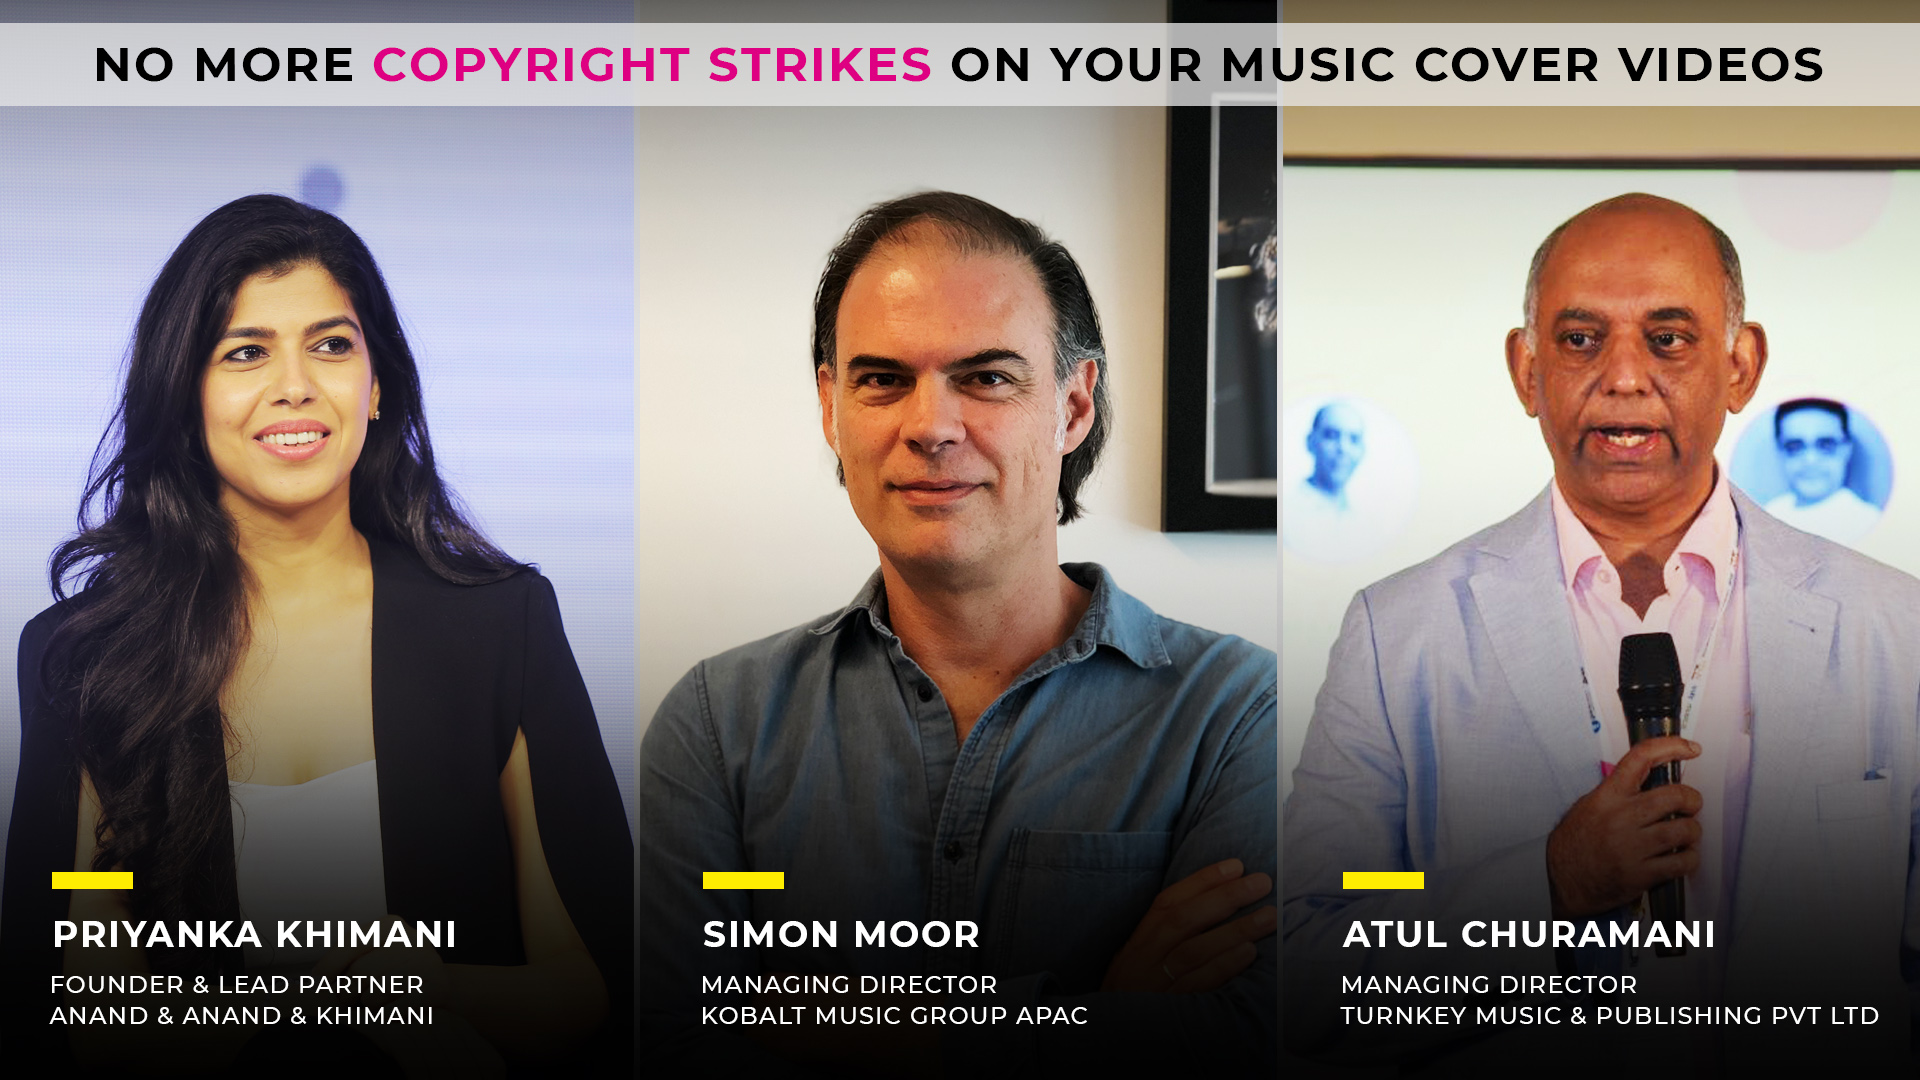 No More copyrights strikes on music cover videos,AAM 1st digital session,Licenses,Royalty rates in India and abroad,by Atul Churamani,Priyanka Khimani,Simon Moor,Music Plus